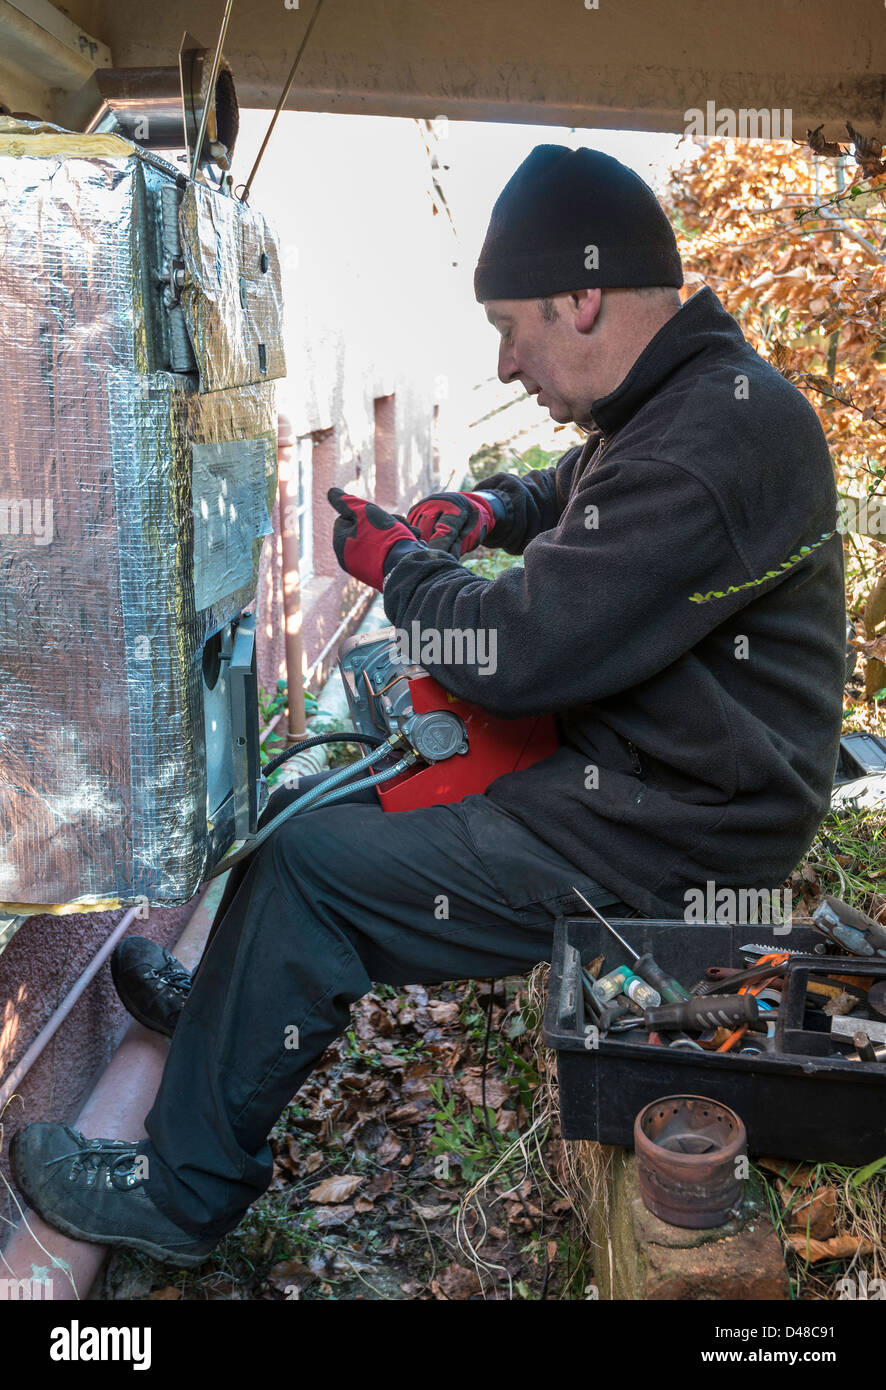 SERVICE ENGINEER SERVICING CENTRAL HEATING OIL-FIRED BOILER IN GARDEN UK, Stock Photo